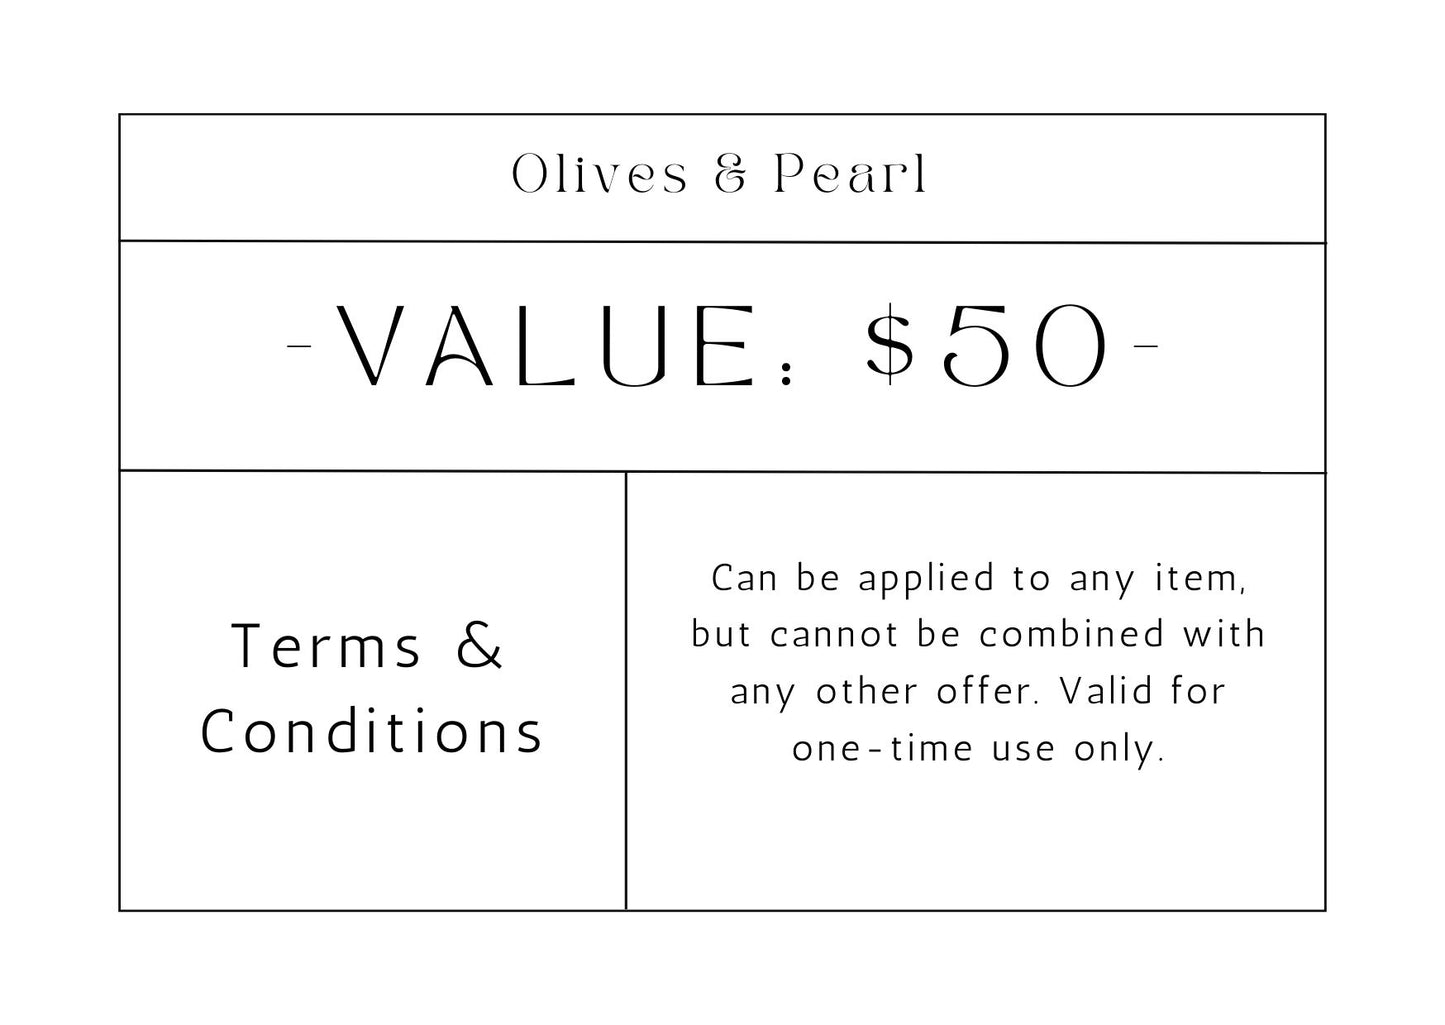 Olives & Pearl Montreal Gift Card